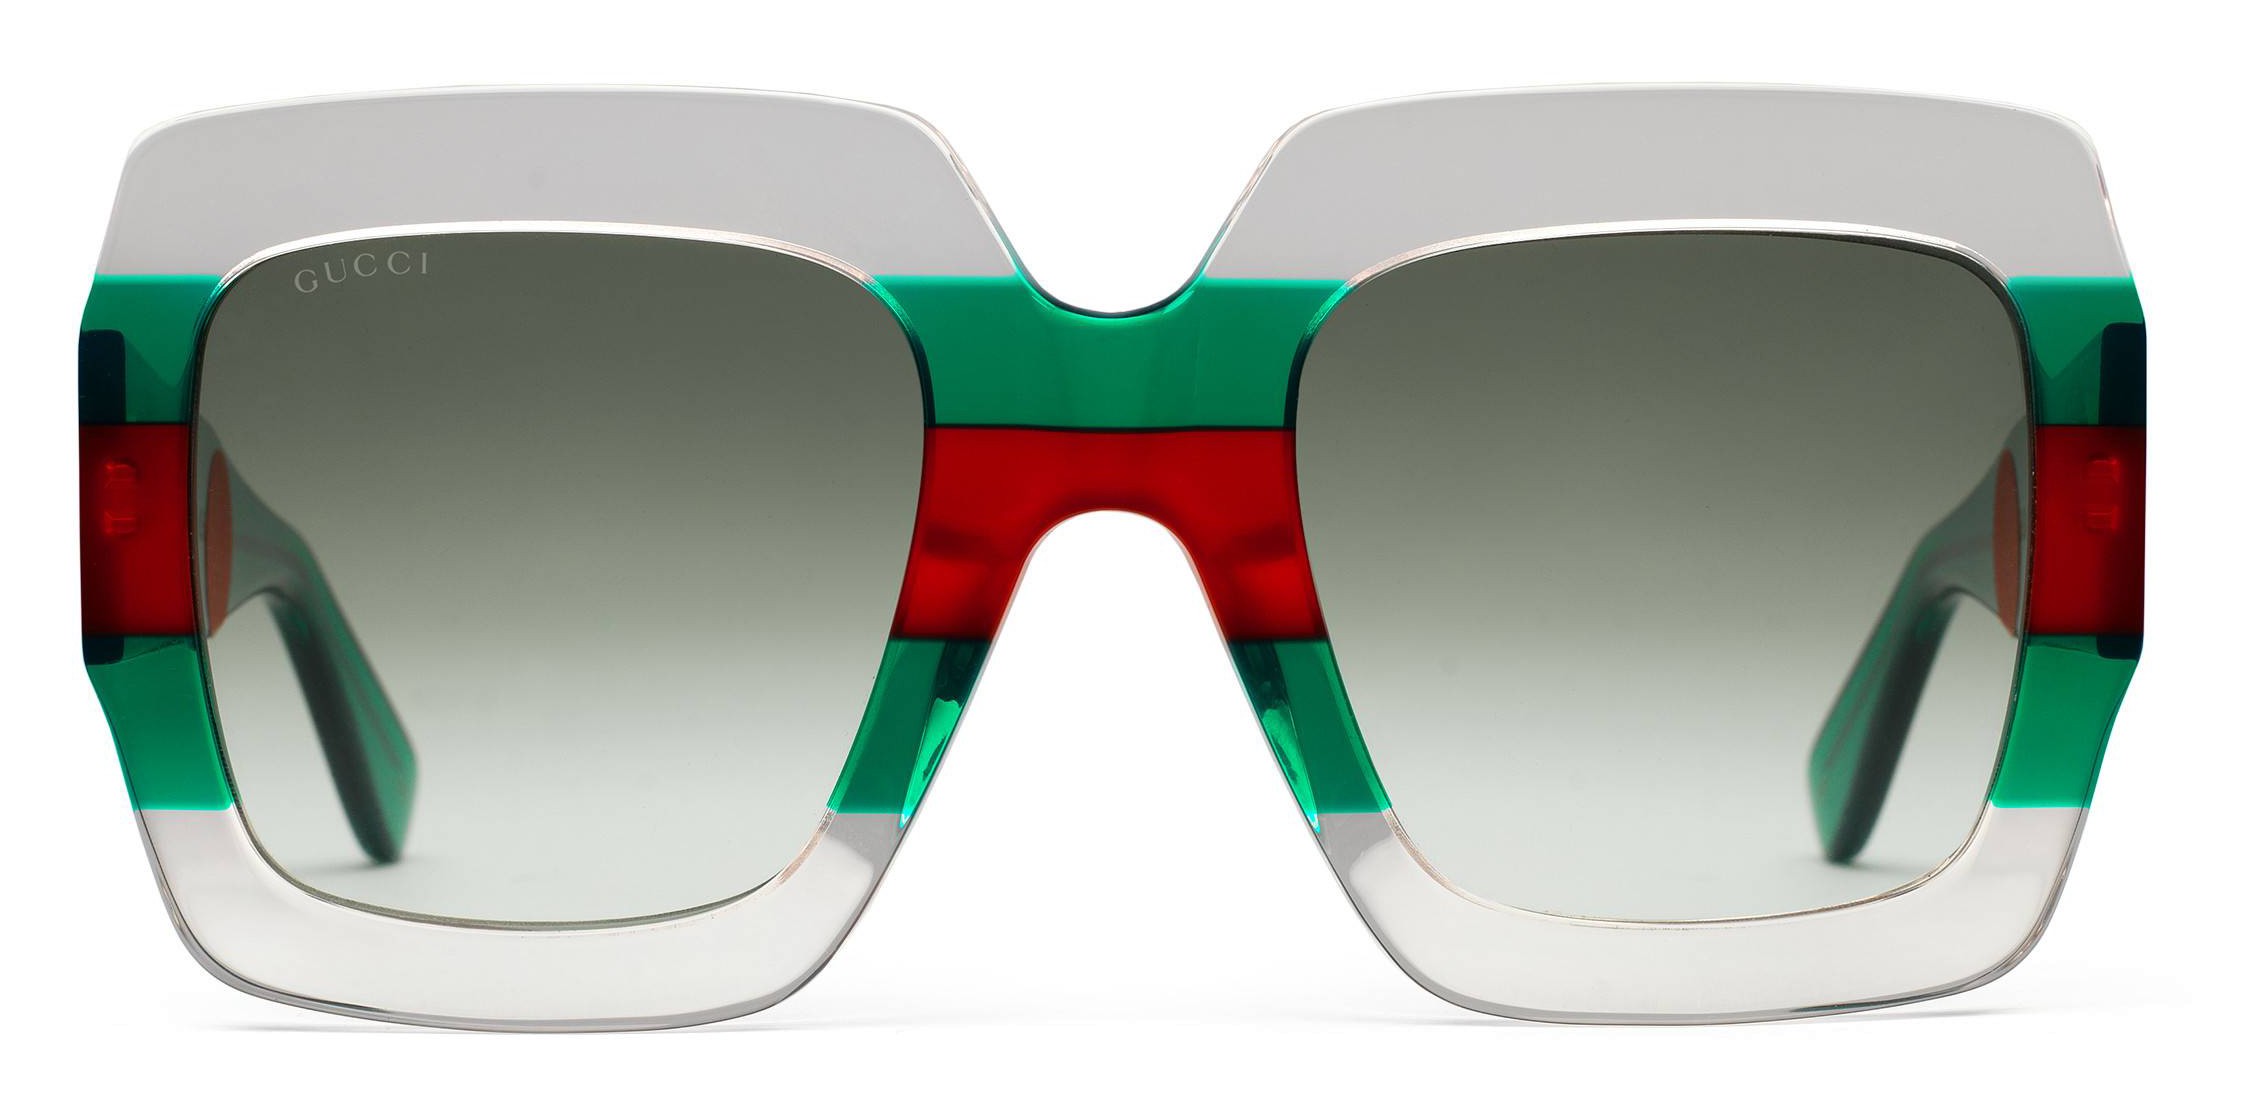 Gucci - Square Acetate Sunglasses - Transparent Acetate with Green and Red  Web Detail - Gucci Eyewear - Avvenice